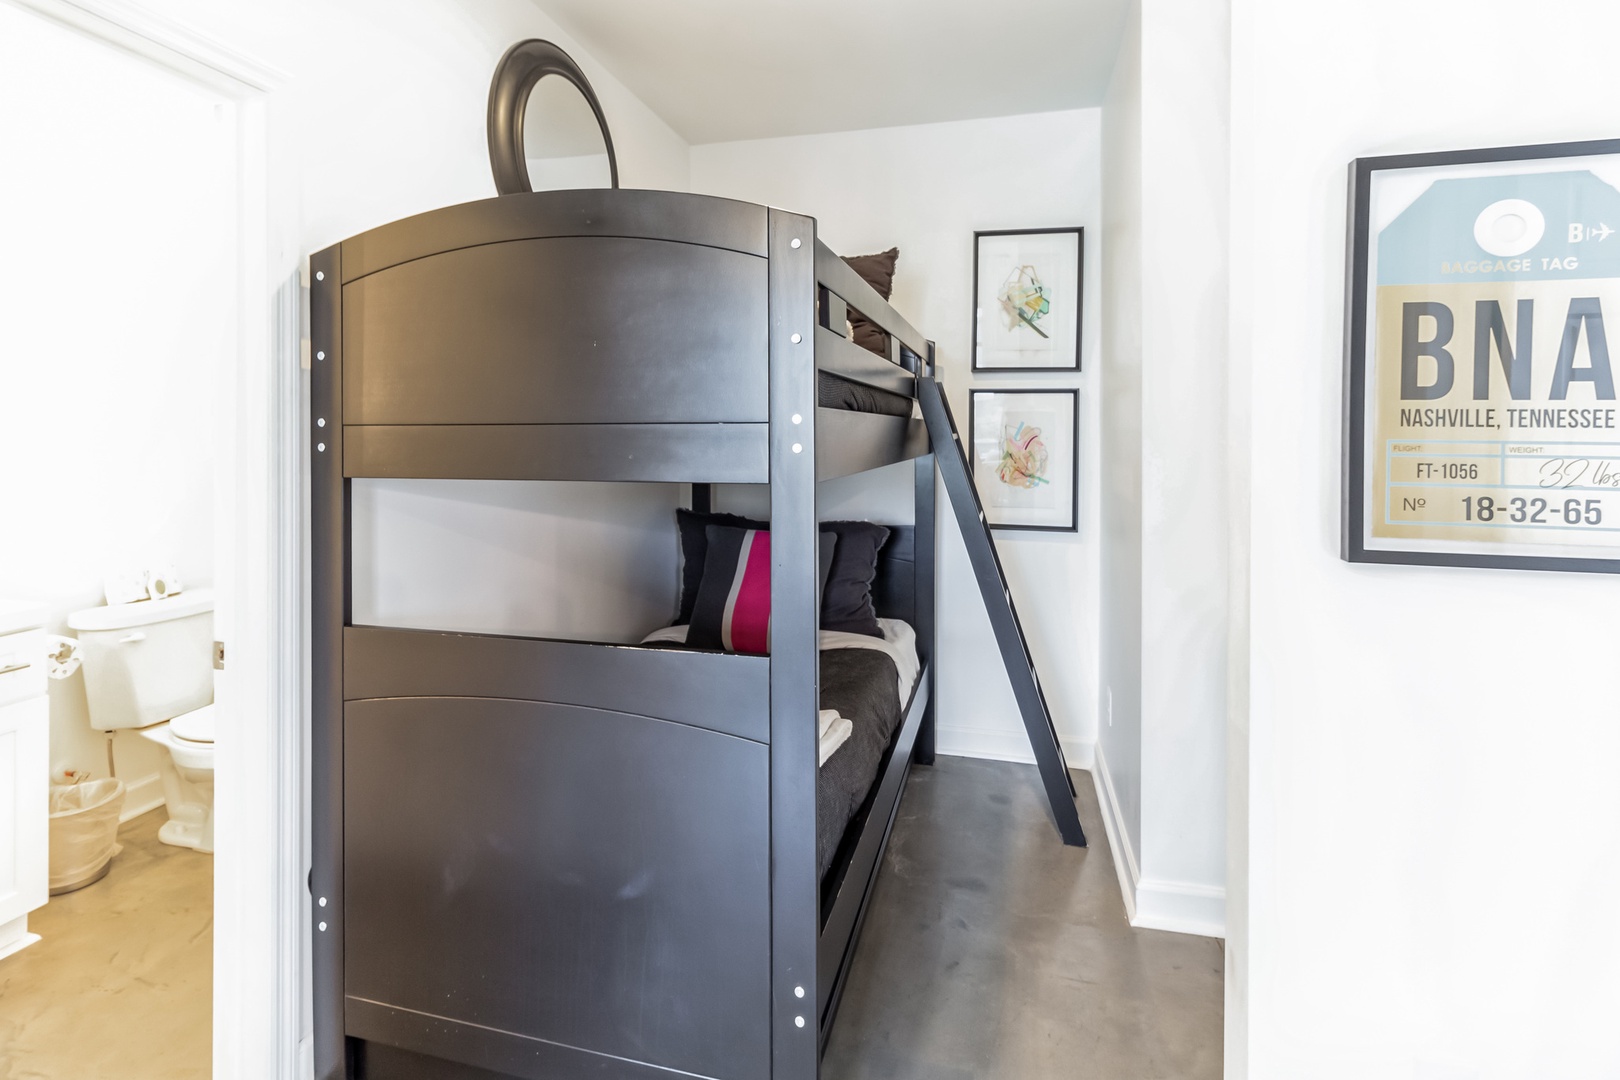 Twin-over-twin bunks are tucked away in the serene alcove off the living area